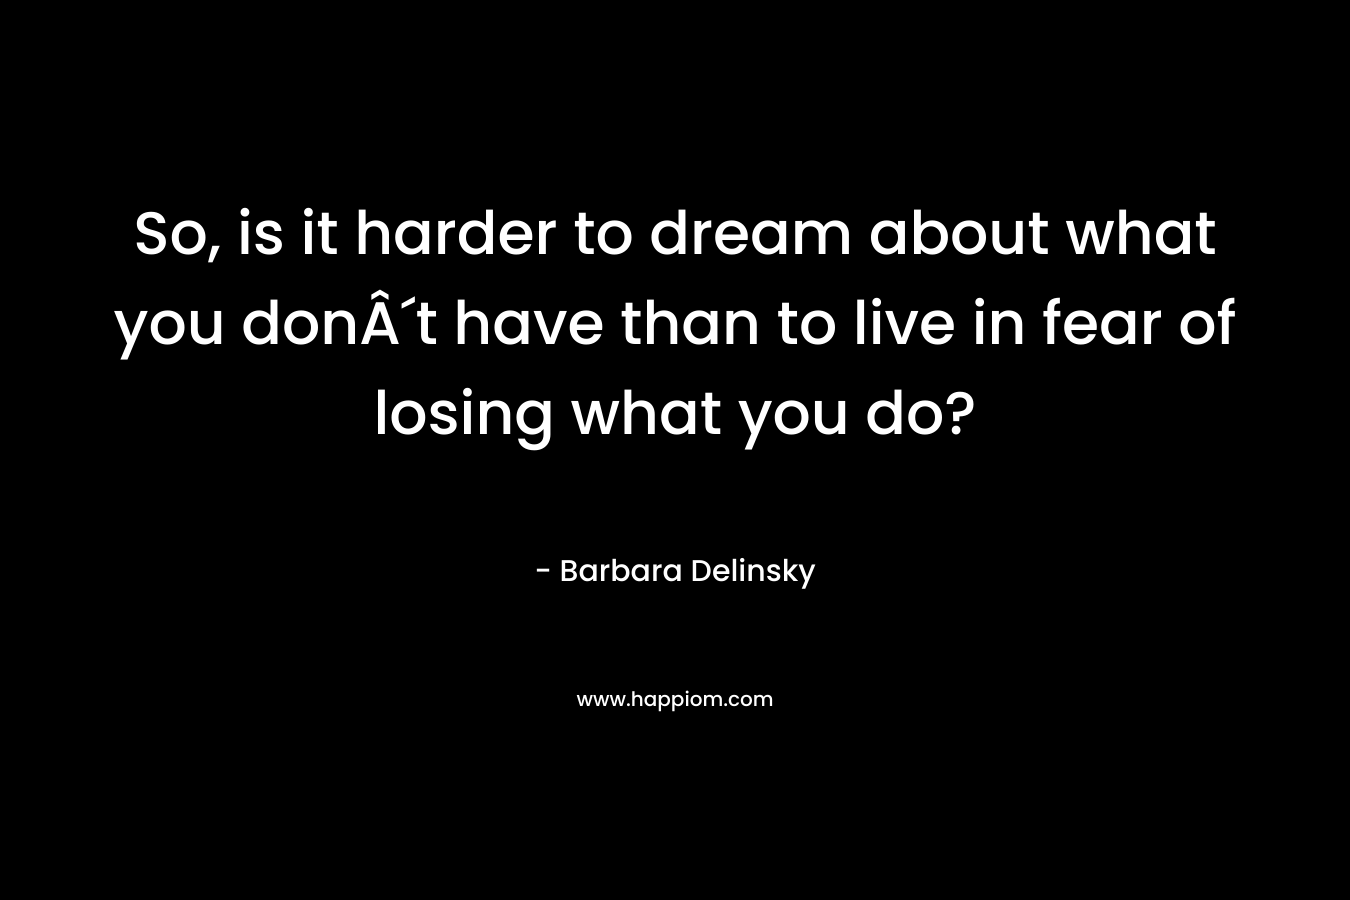 So, is it harder to dream about what you donÂ´t have than to live in fear of losing what you do?